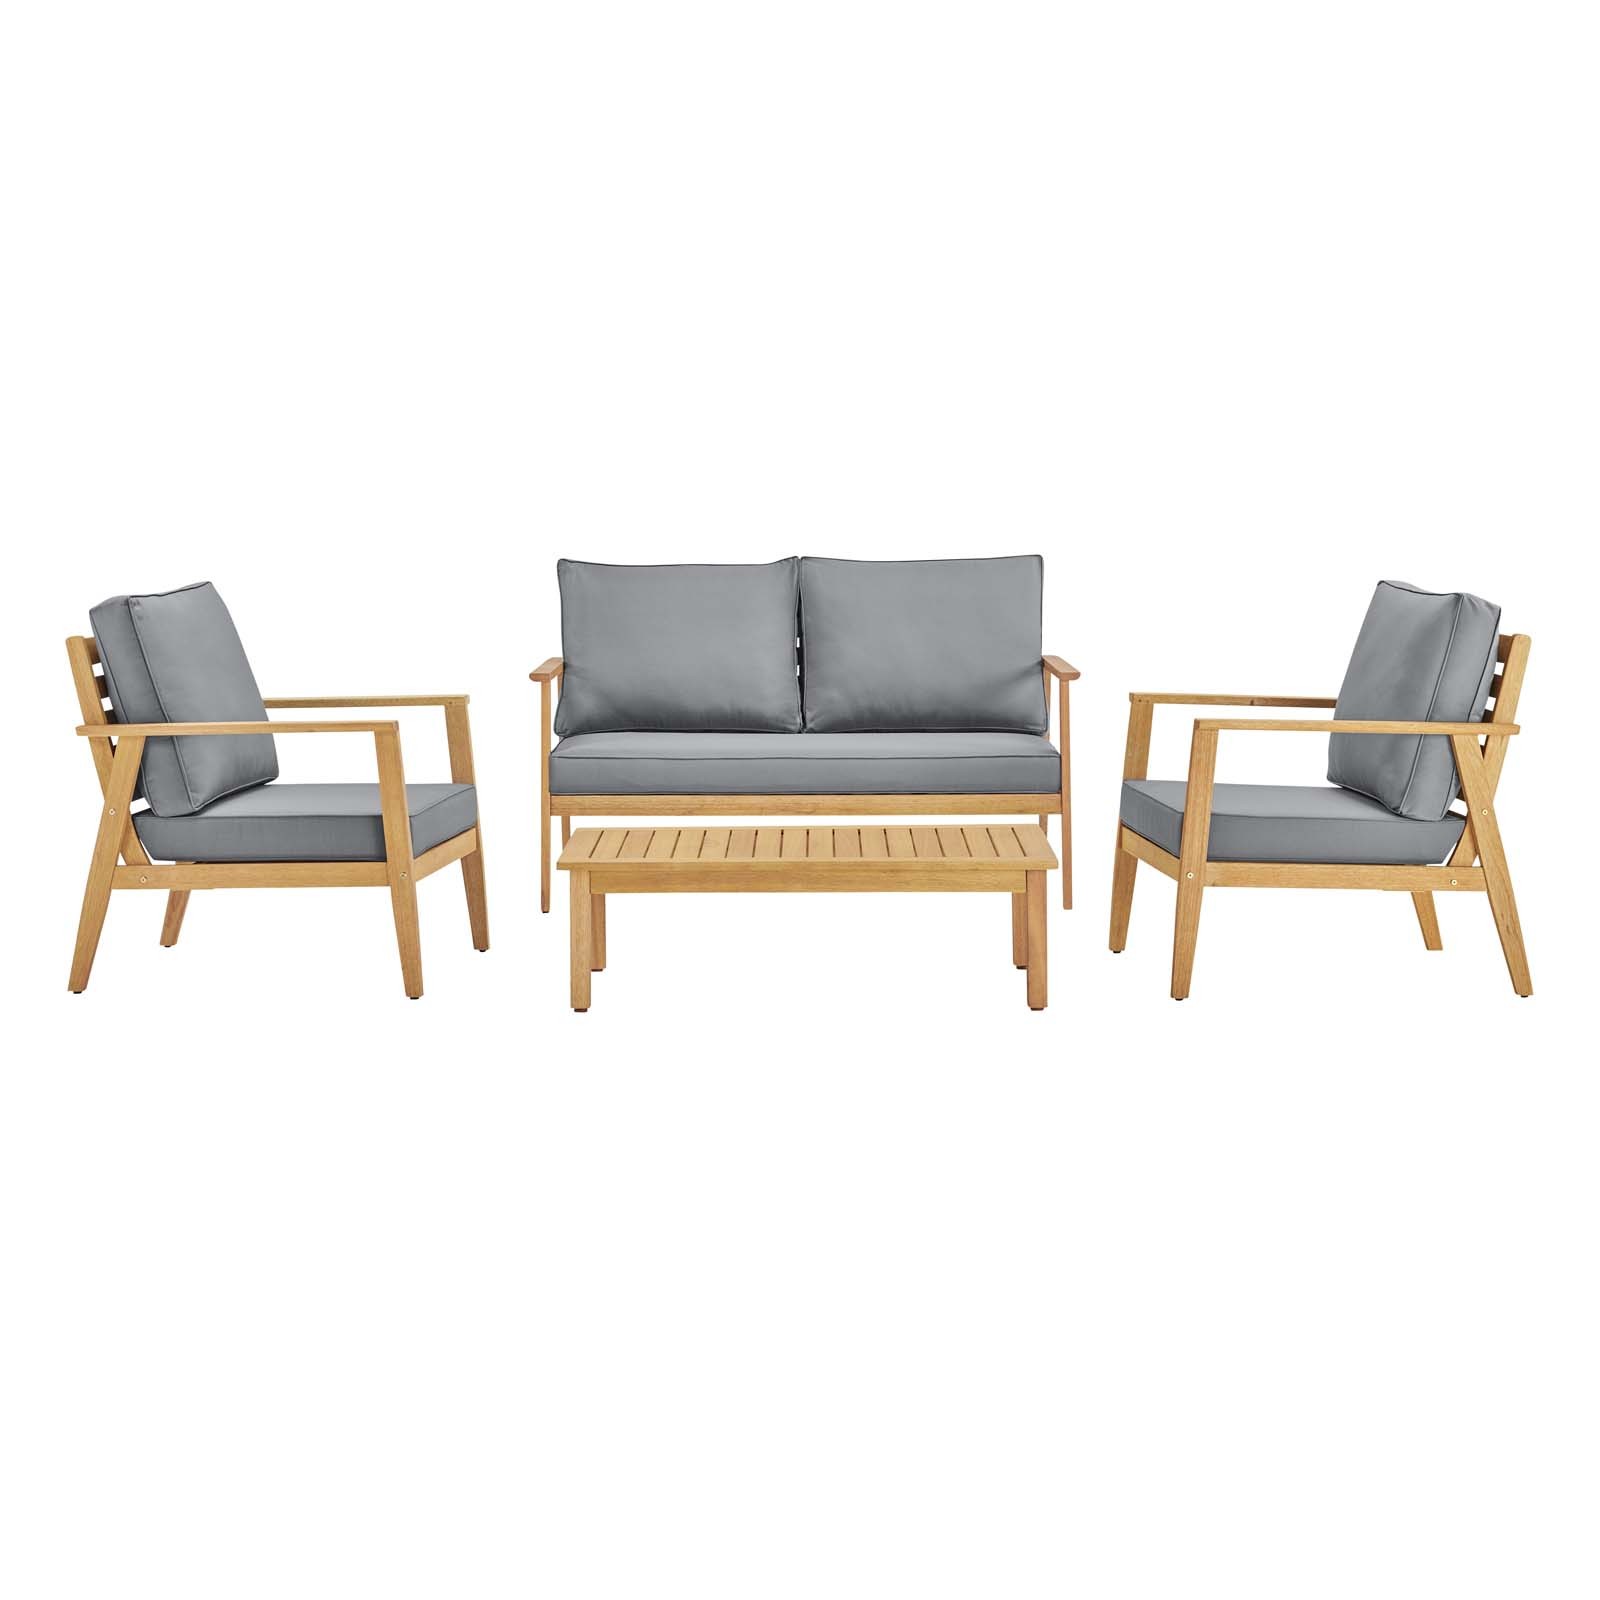 Syracuse Outdoor Patio Upholstered 4 Piece Furniture Set in Natural Gray